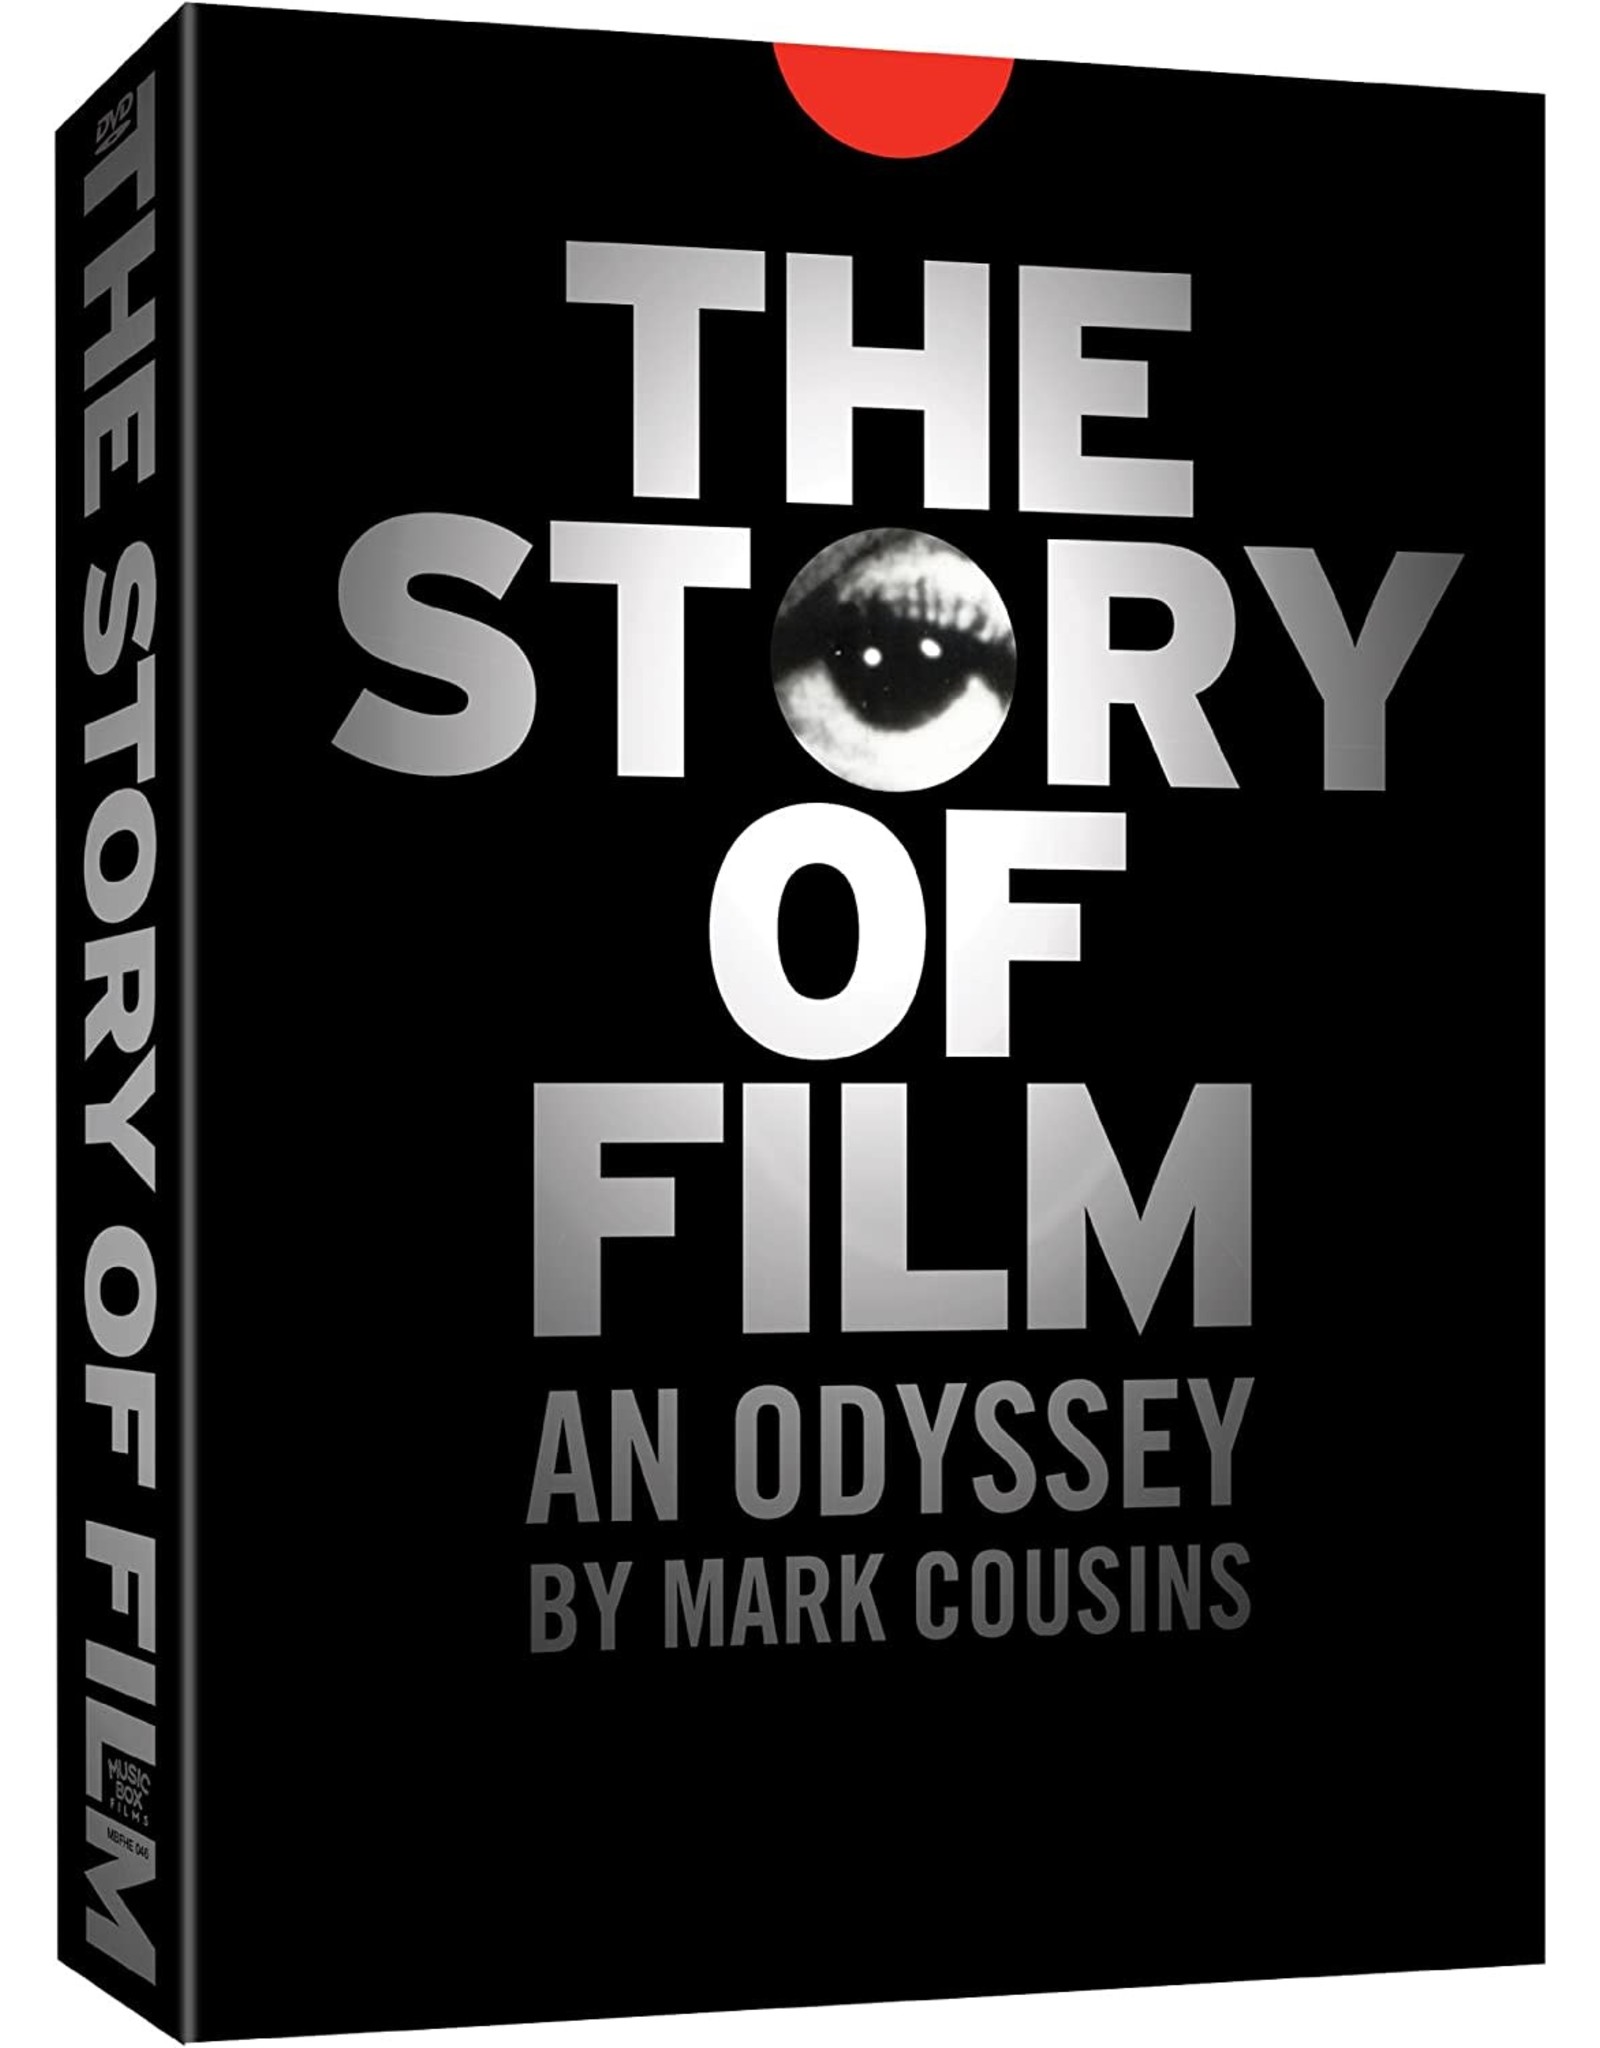 Cult & Cool Story of Film, The (No Slipcover)